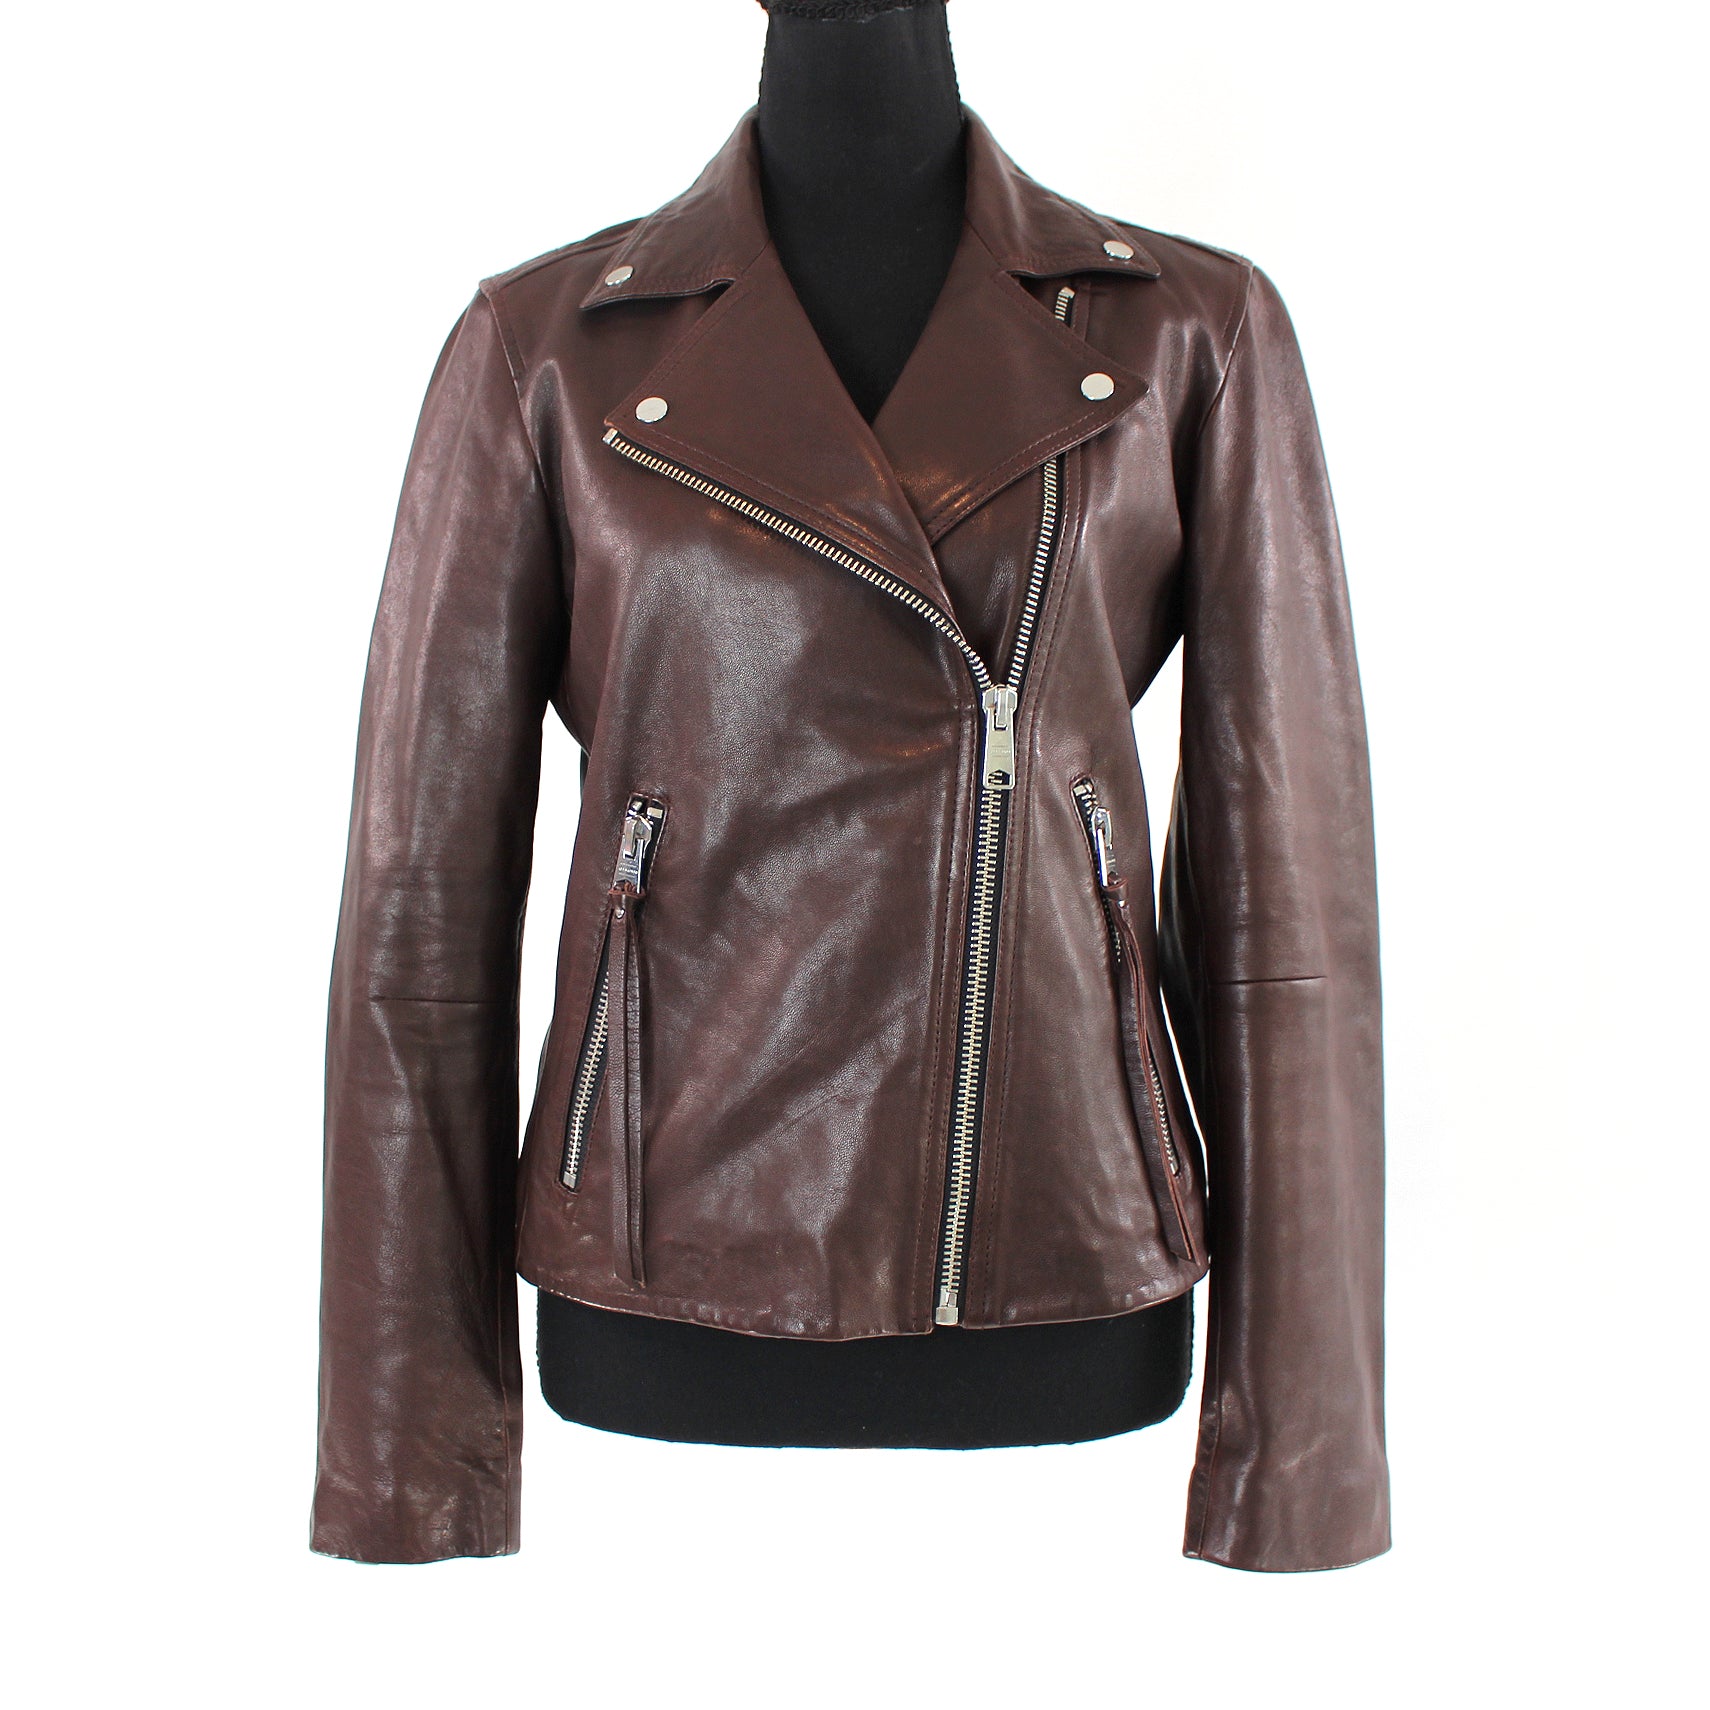 All Saints Oxblood Leather Zip-Up Brown Closet Dalby The New Biker York – Jacket